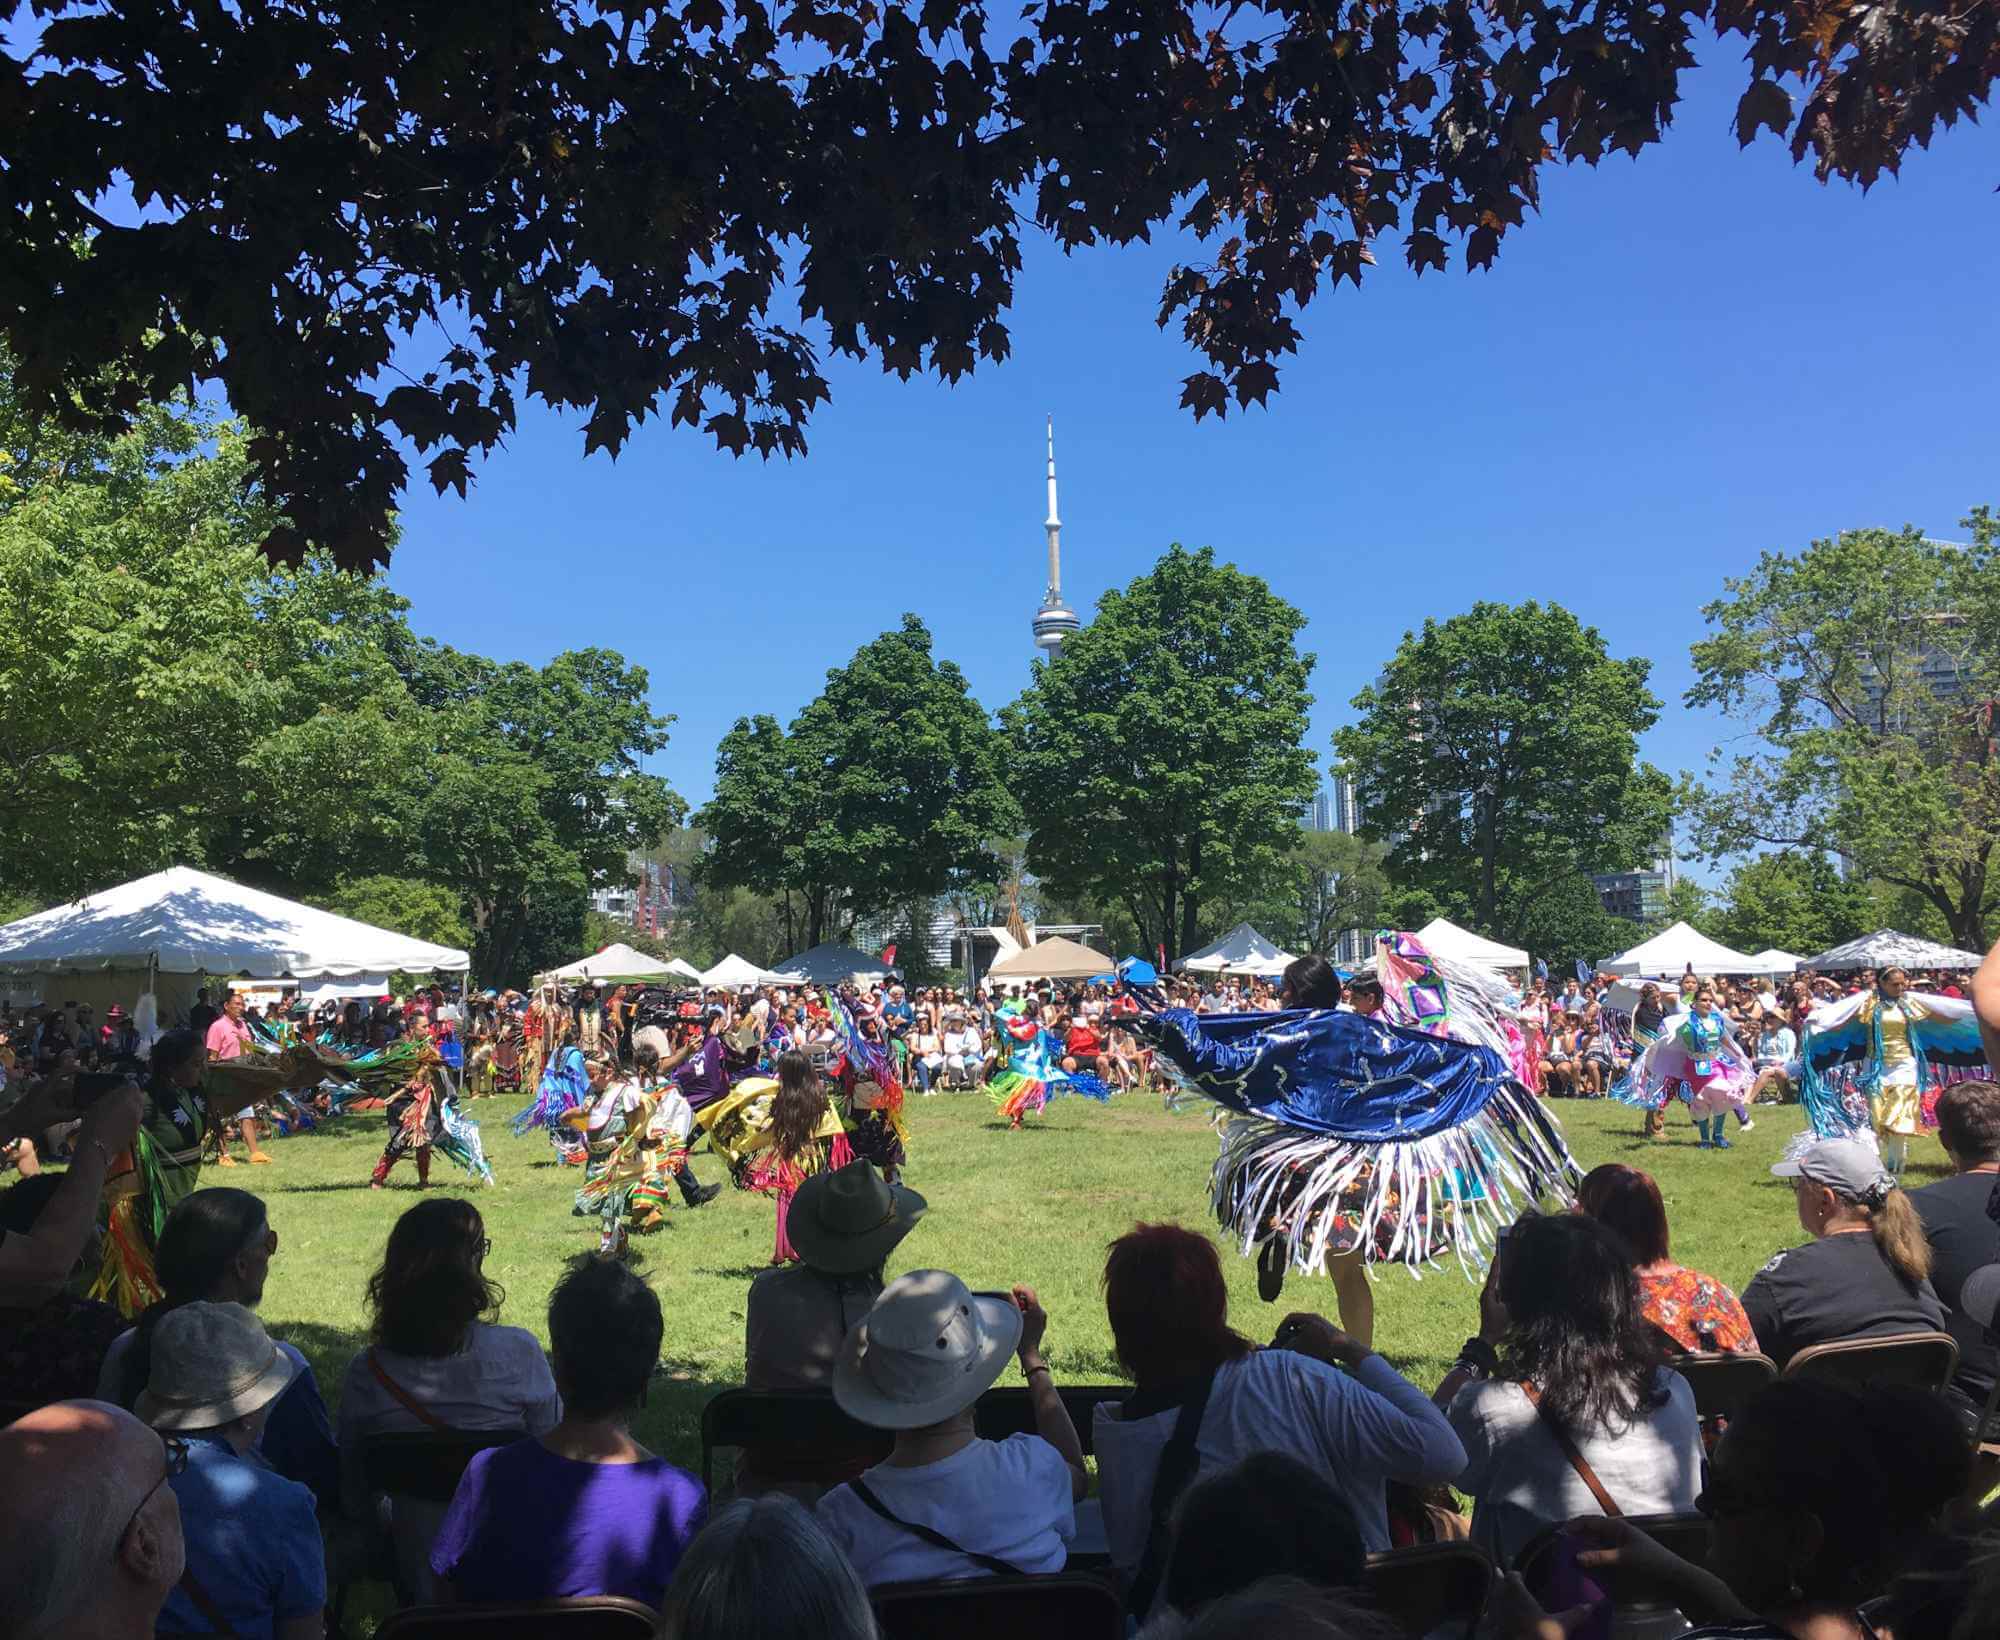 Colour photo of pow wow dancers in regalia dancing in a circle. Surrounding the circle are people watching the dancers. Beyond that are white vendor booths. In the background are trees and the top of the CN Tower can be seen in the distance.